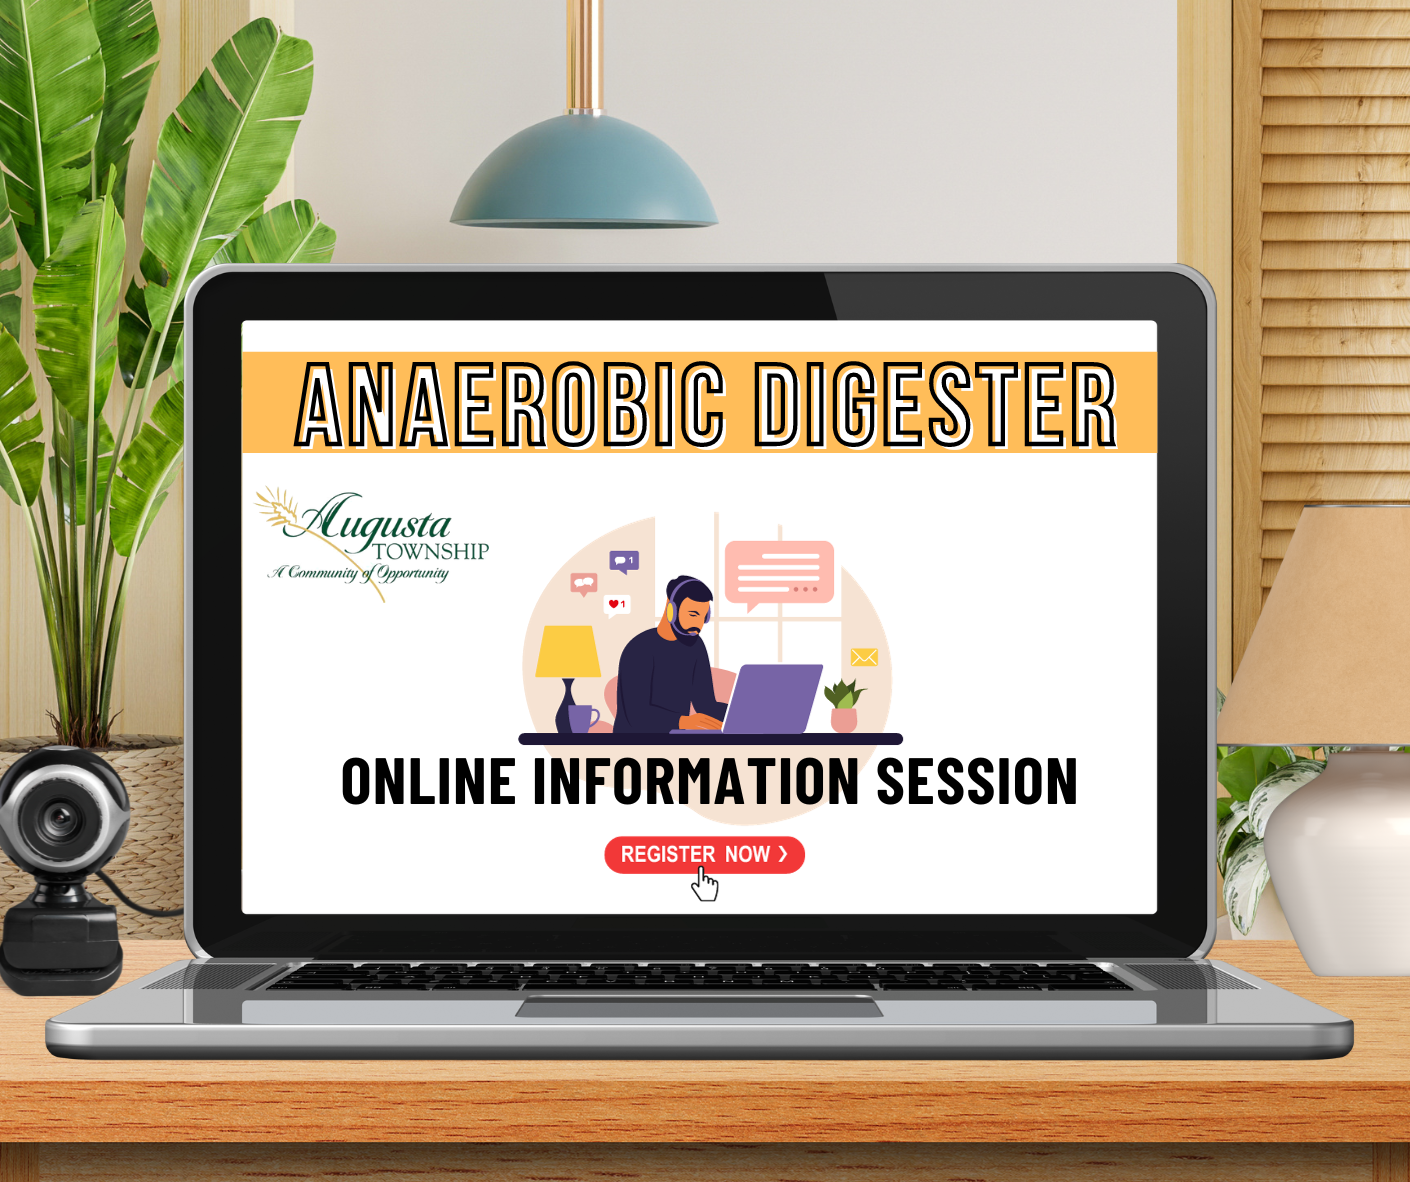 laptop that has says anaerobic digester online information session, register today